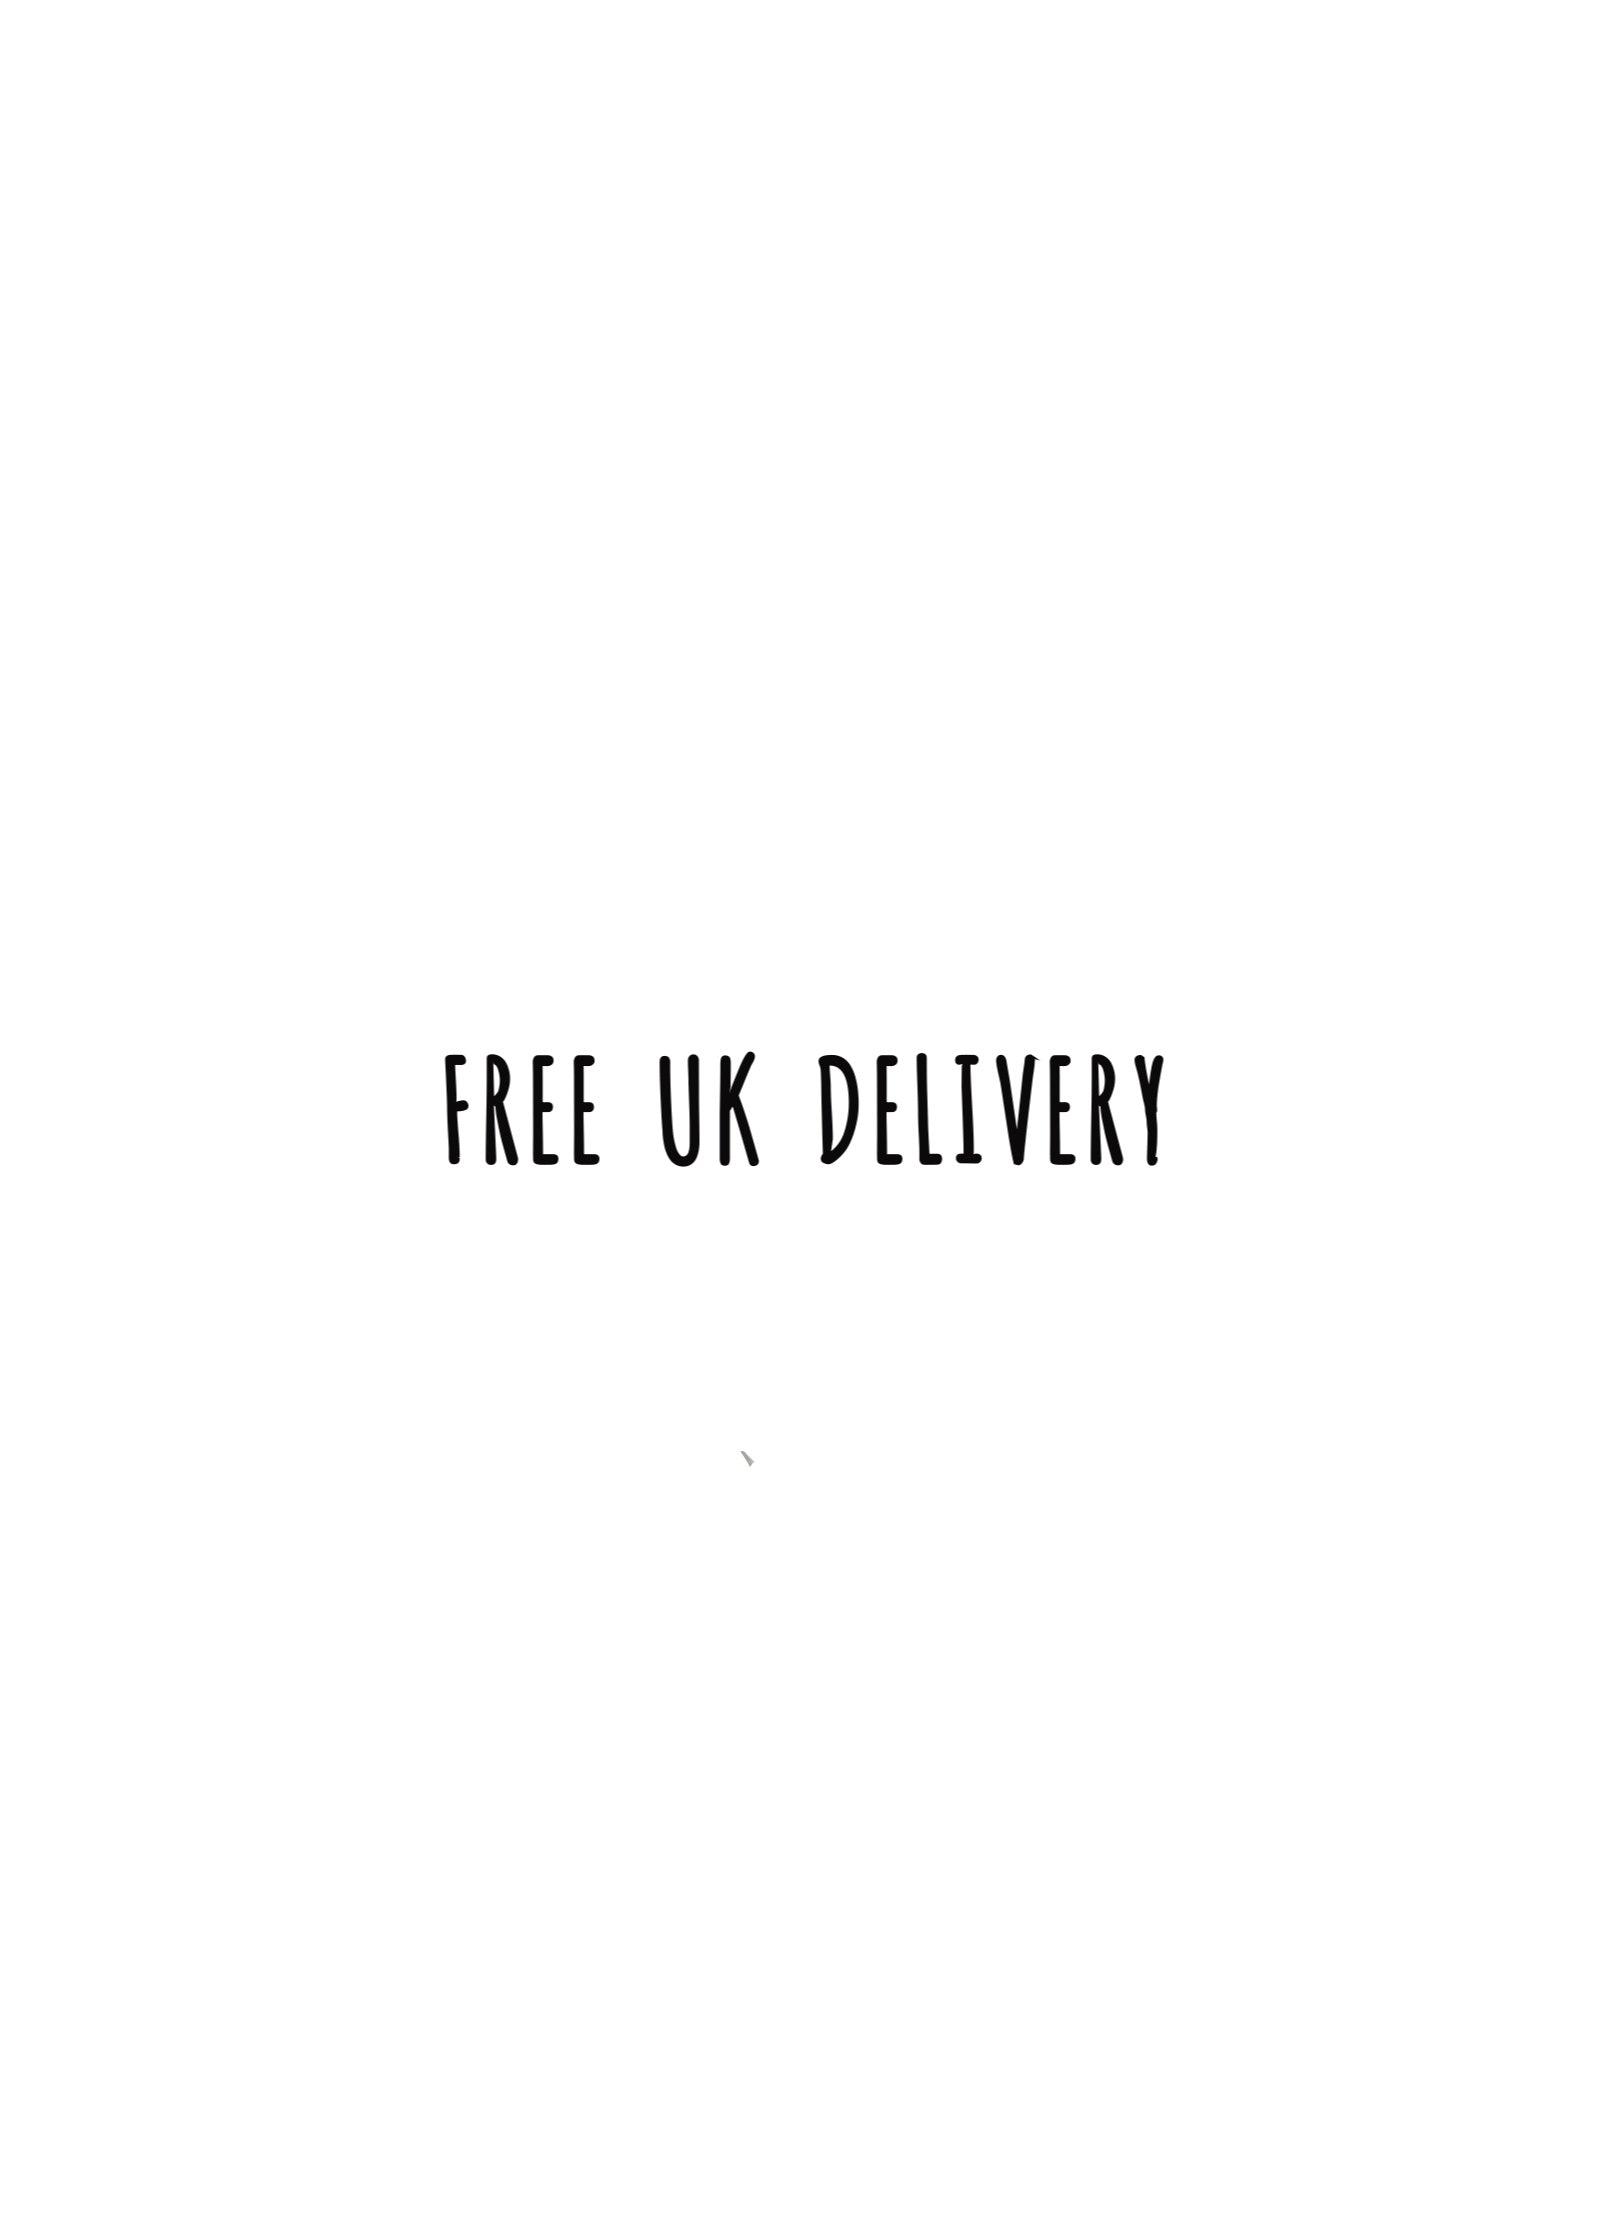 FREE UK DELIVERY